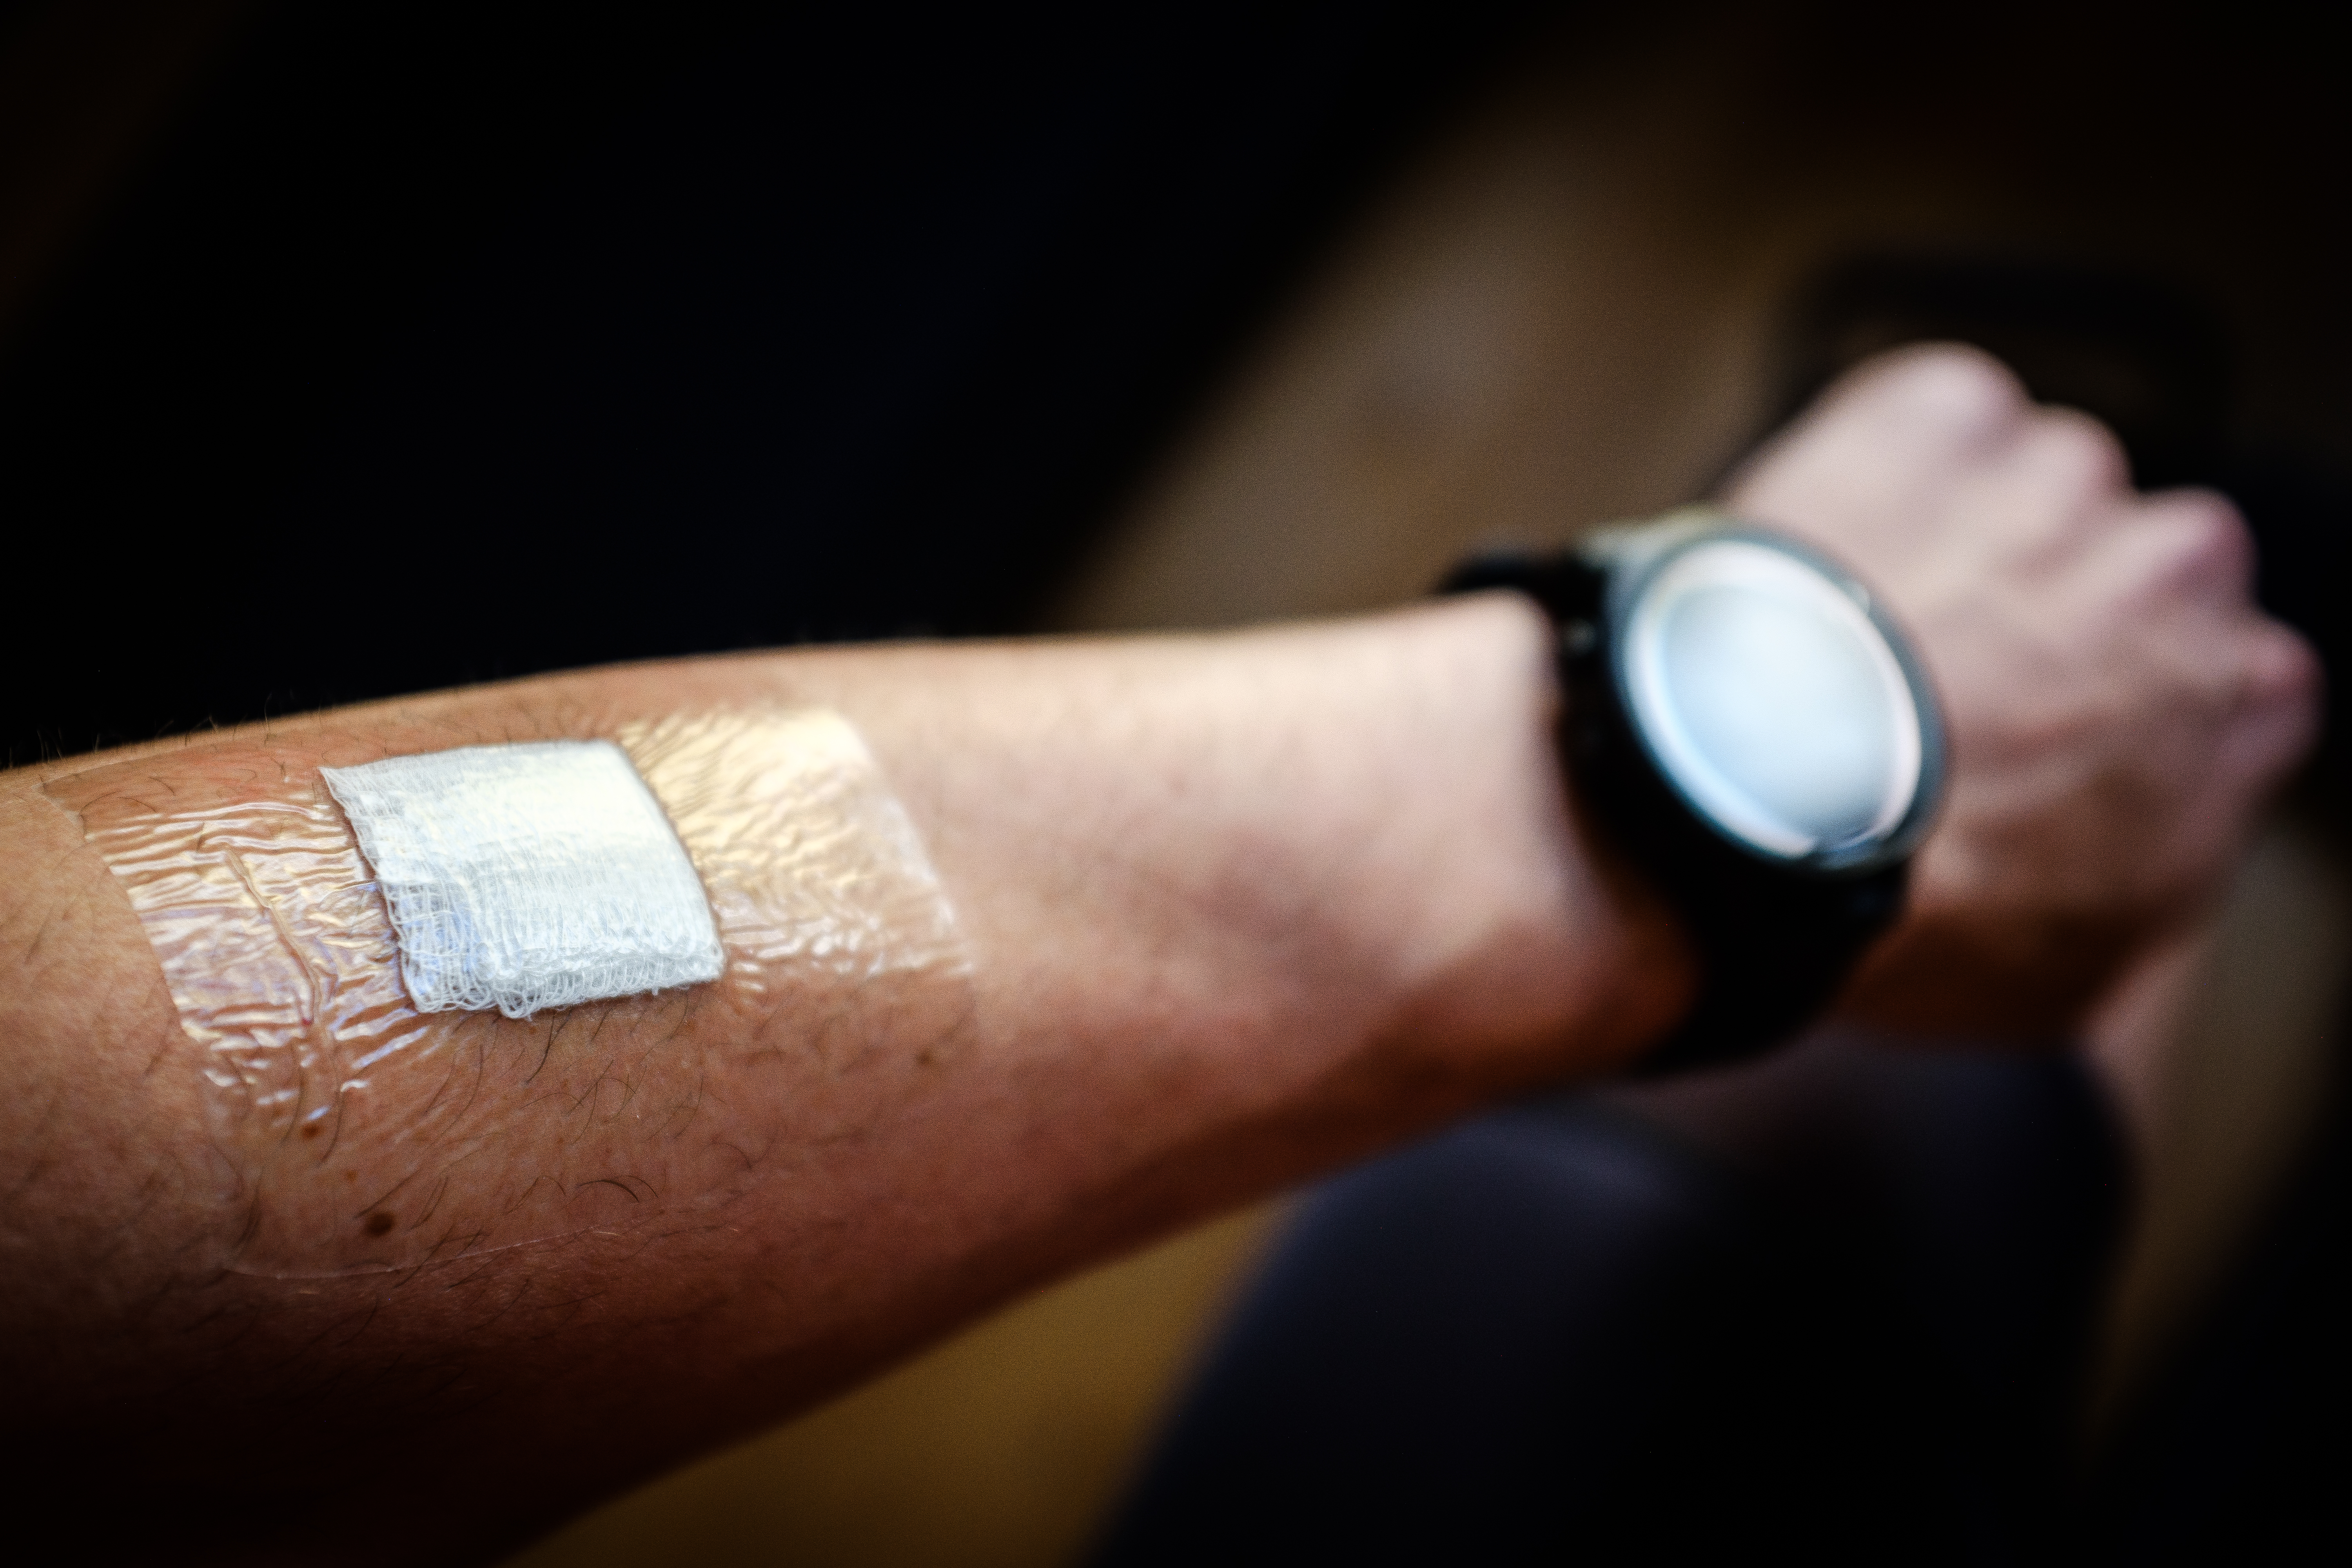 My left arm, with one of the patches for the Levelen sweat test on my forearm. The patch is a small square of gauze held in place by a transparent adhesive film.